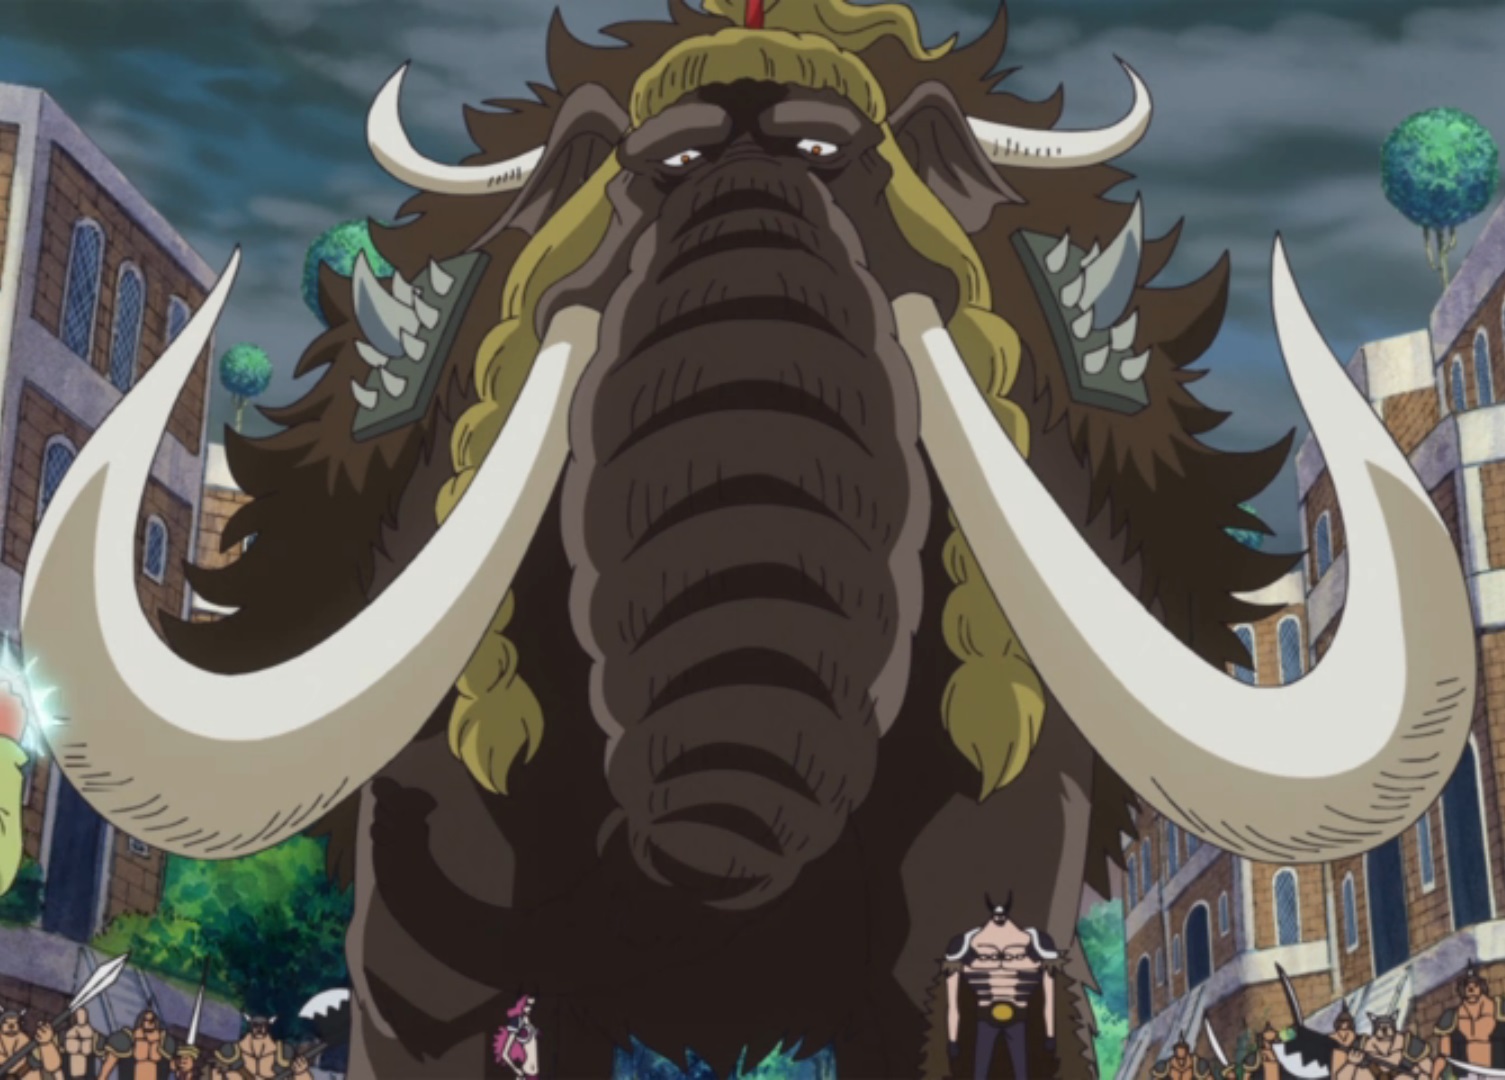 Kaido's 3 Disasters: KING, QUEEN, JACK 